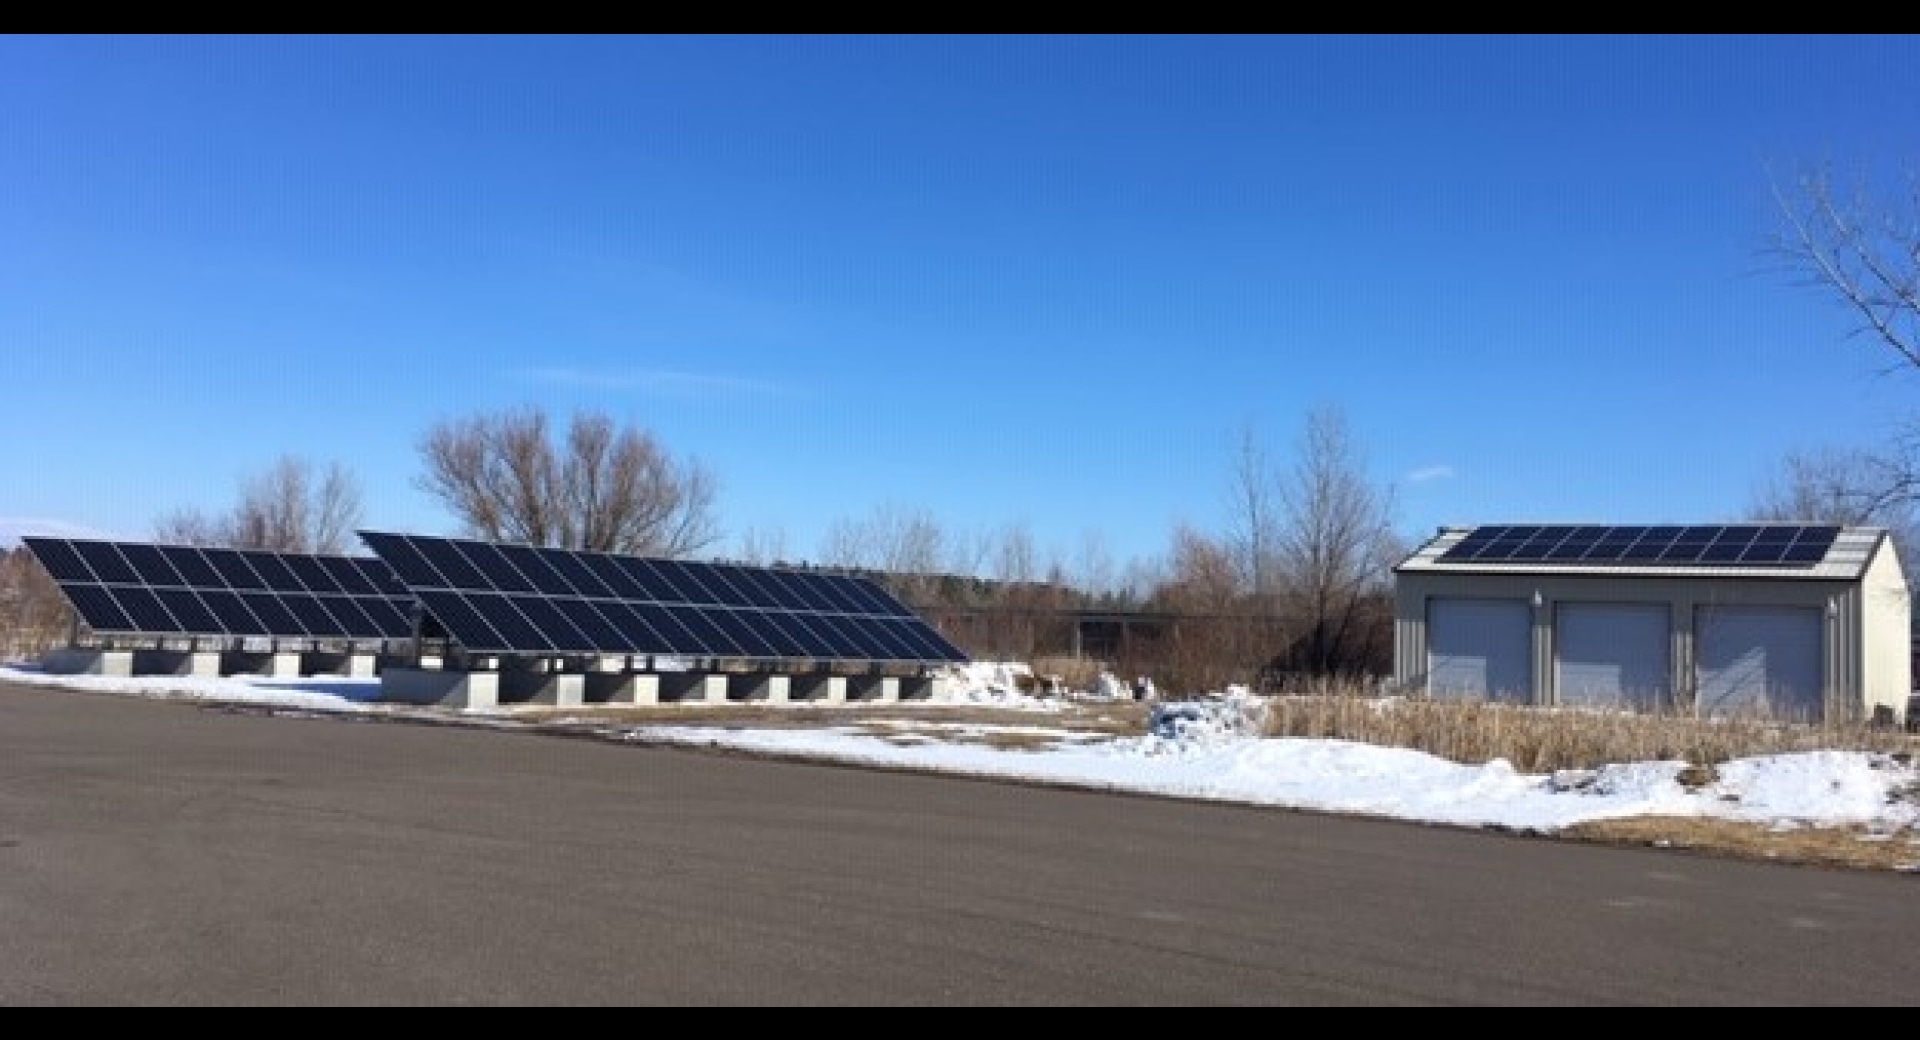 TCC Action built a Solar Garden to help Veterans with Utility Costs